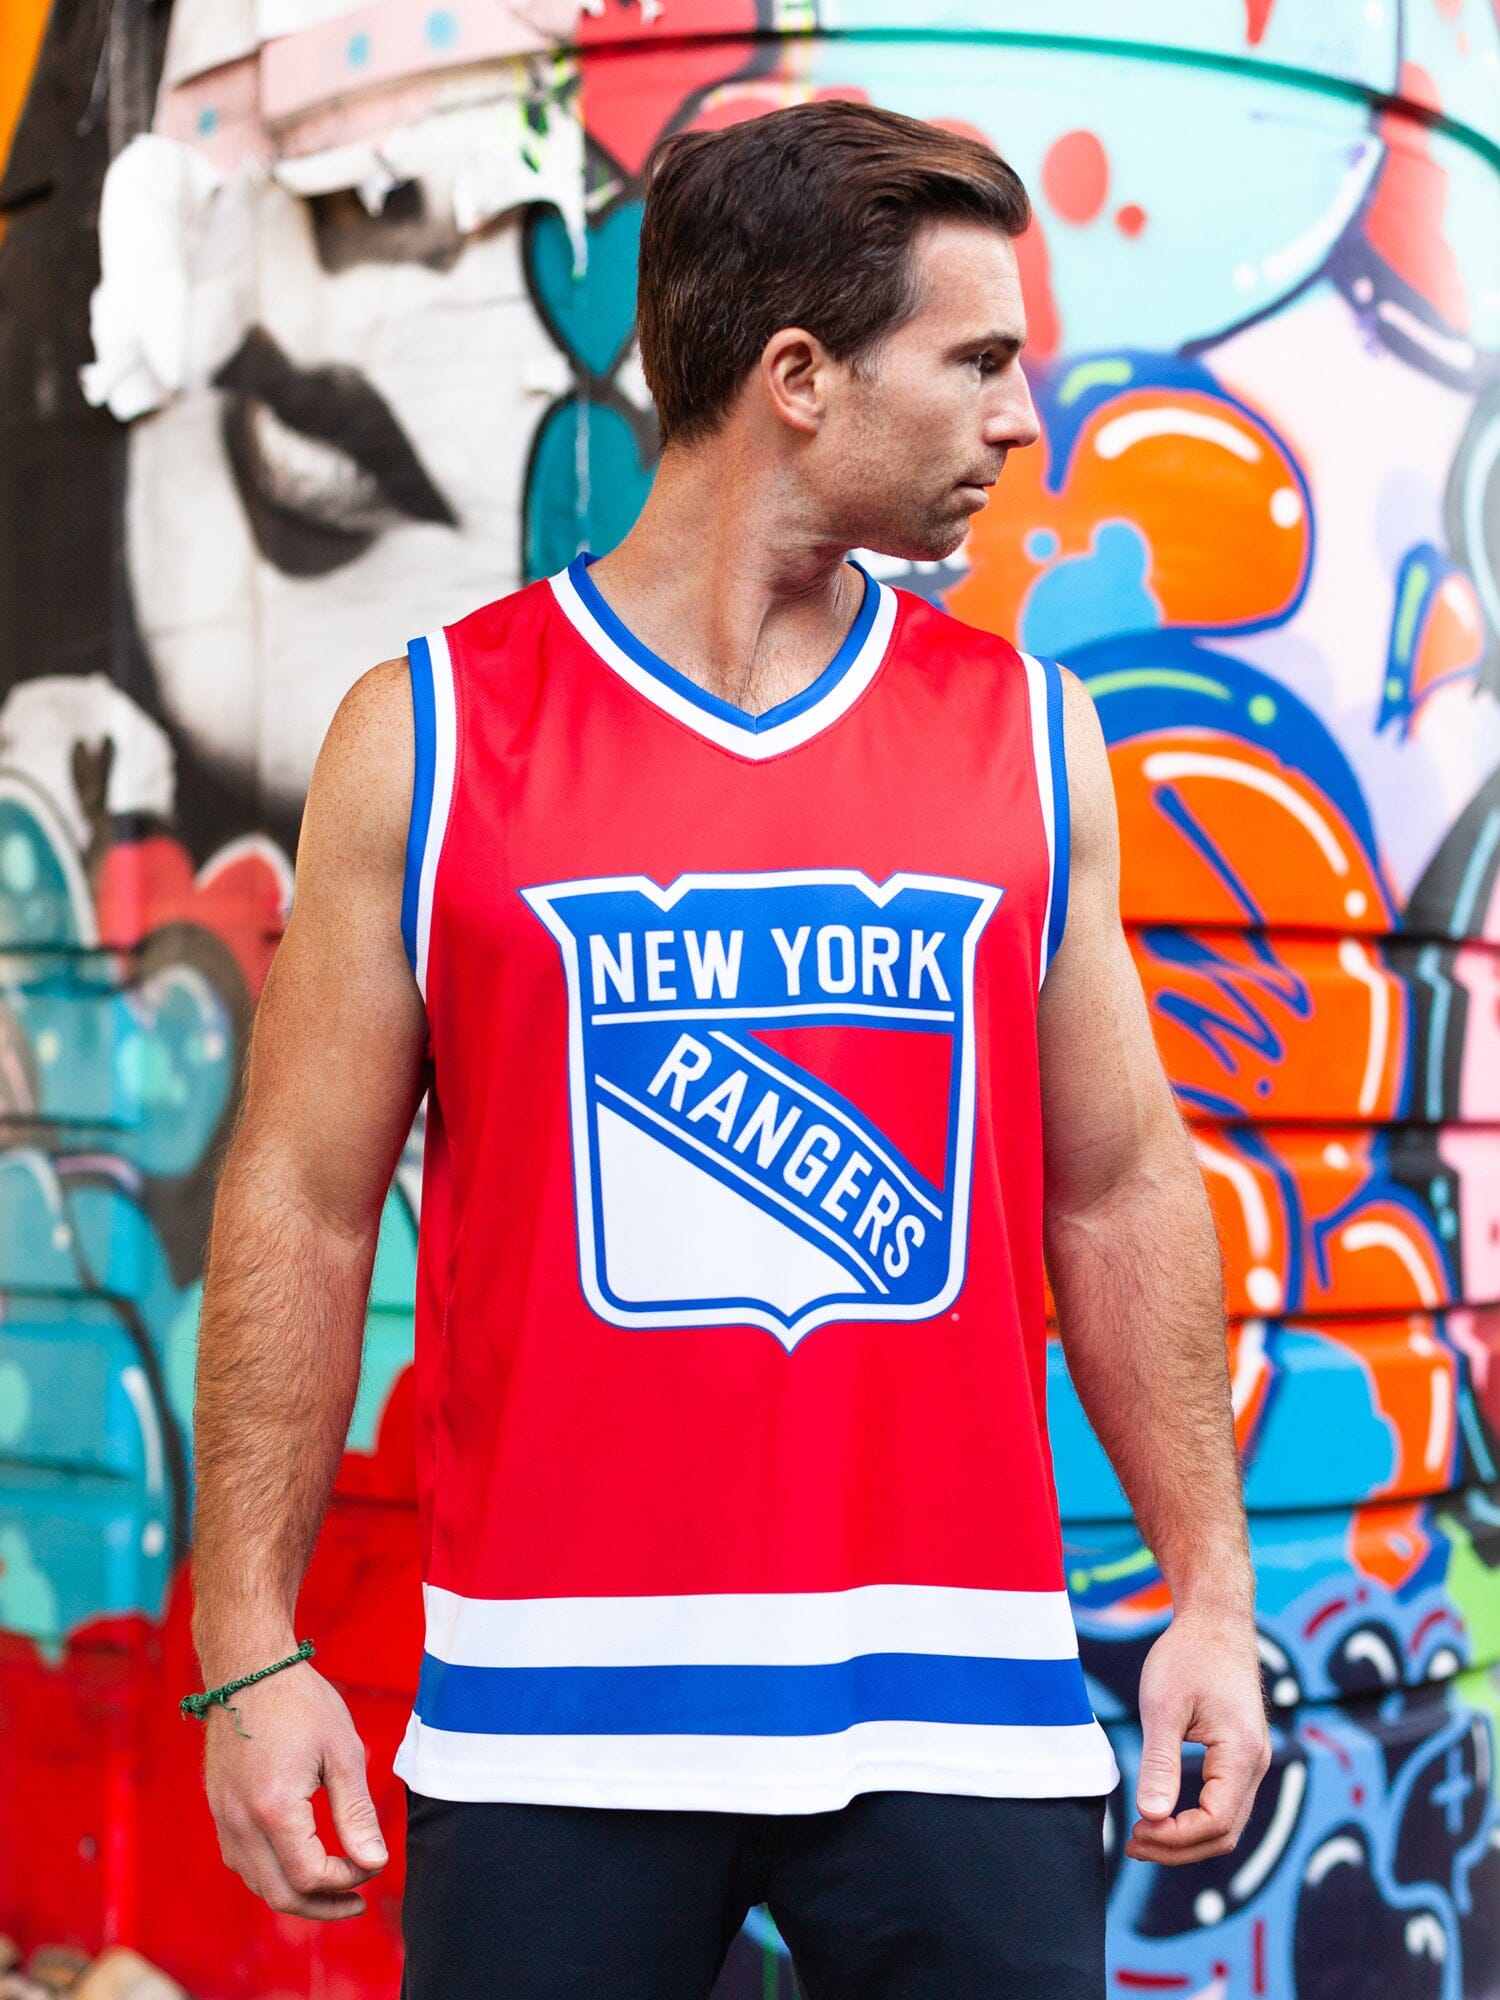 Men's Relaxed New York Rangers Graphic Hockey Jersey Hoodie in Blue Size M from Hollister